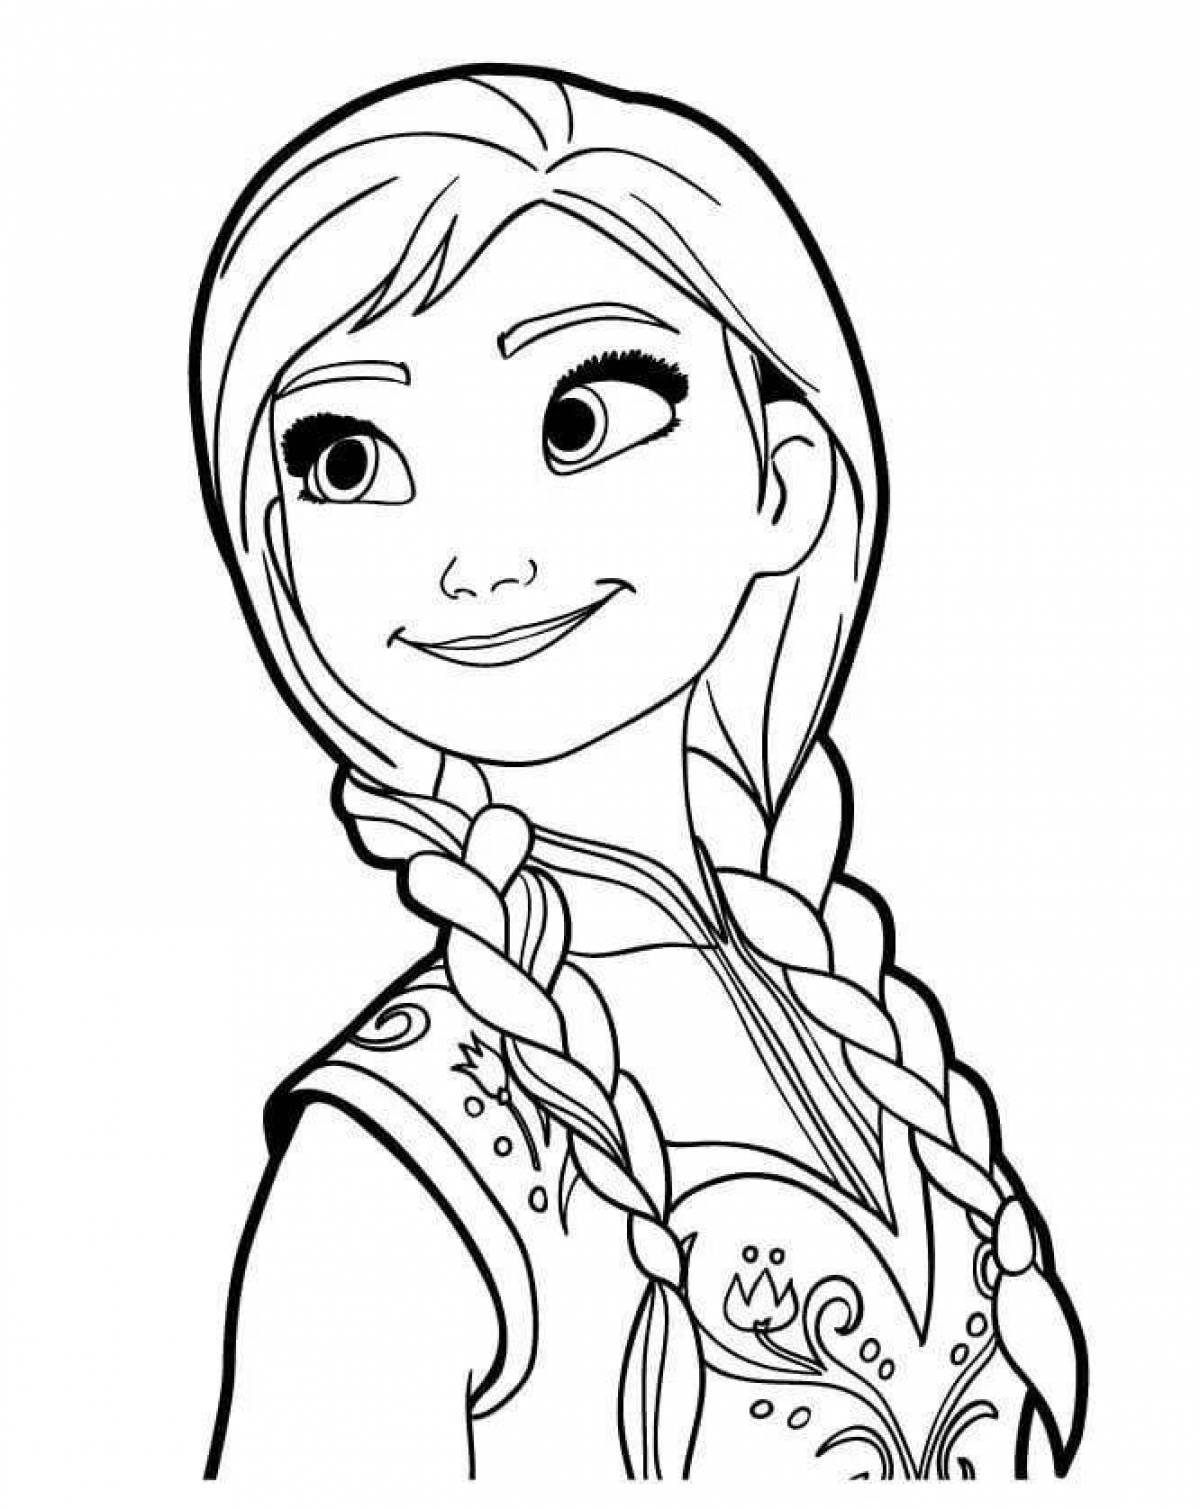 Elsa and anna fairy tale coloring book